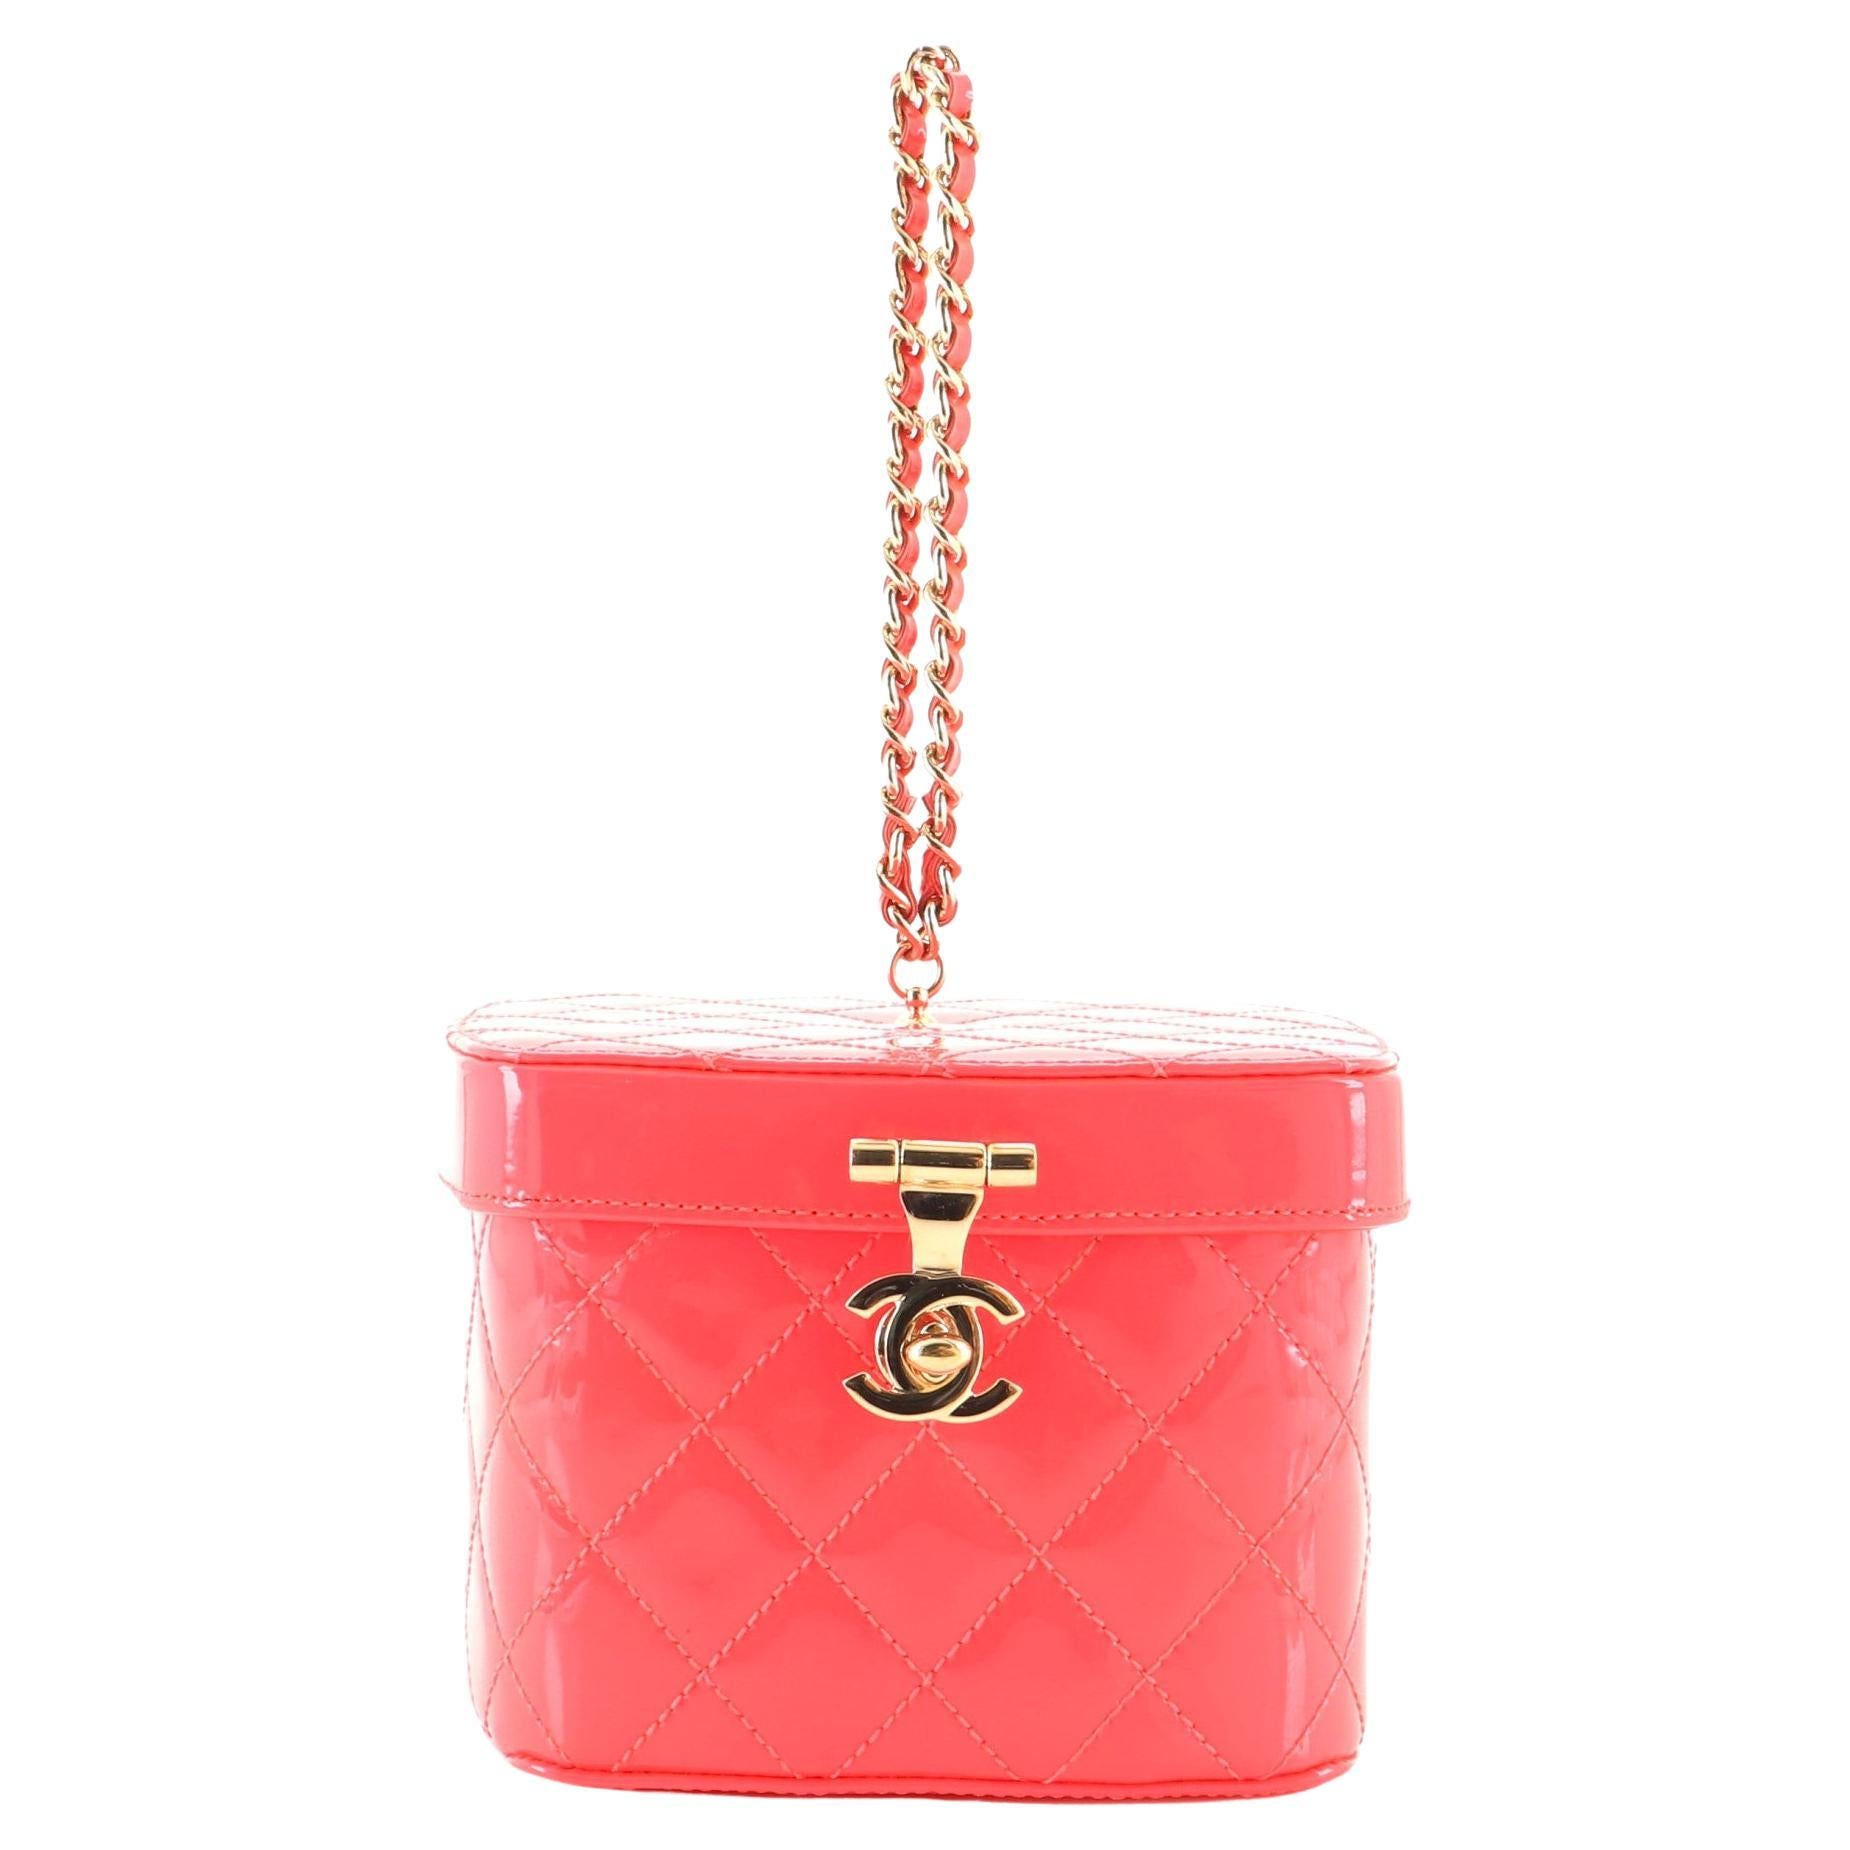 Chanel Makeup Case Minaudiere Quilted Patent Mini